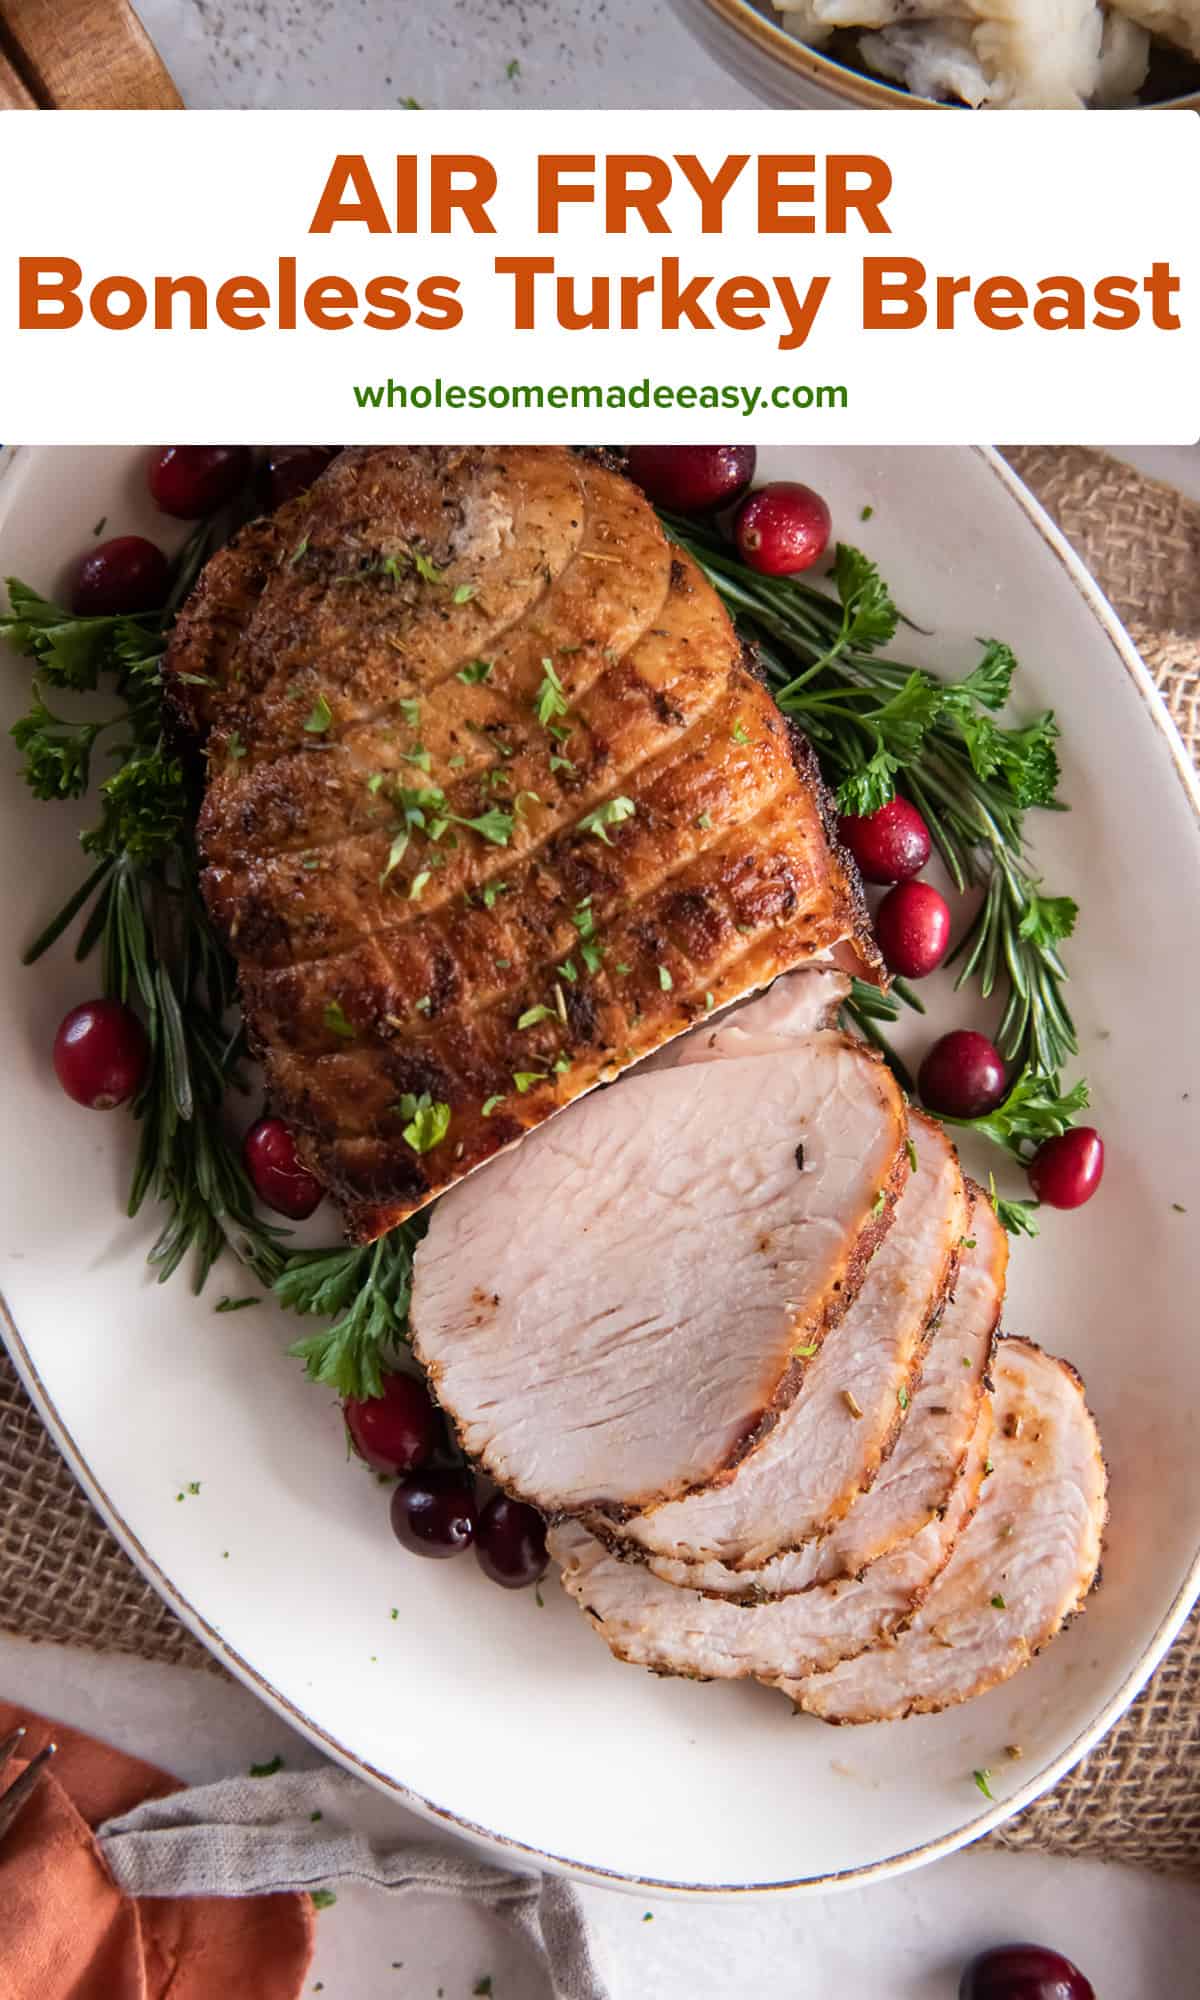 A sliced boneless turkey breast a white platter decorated with fresh herbs and cranberries with text.